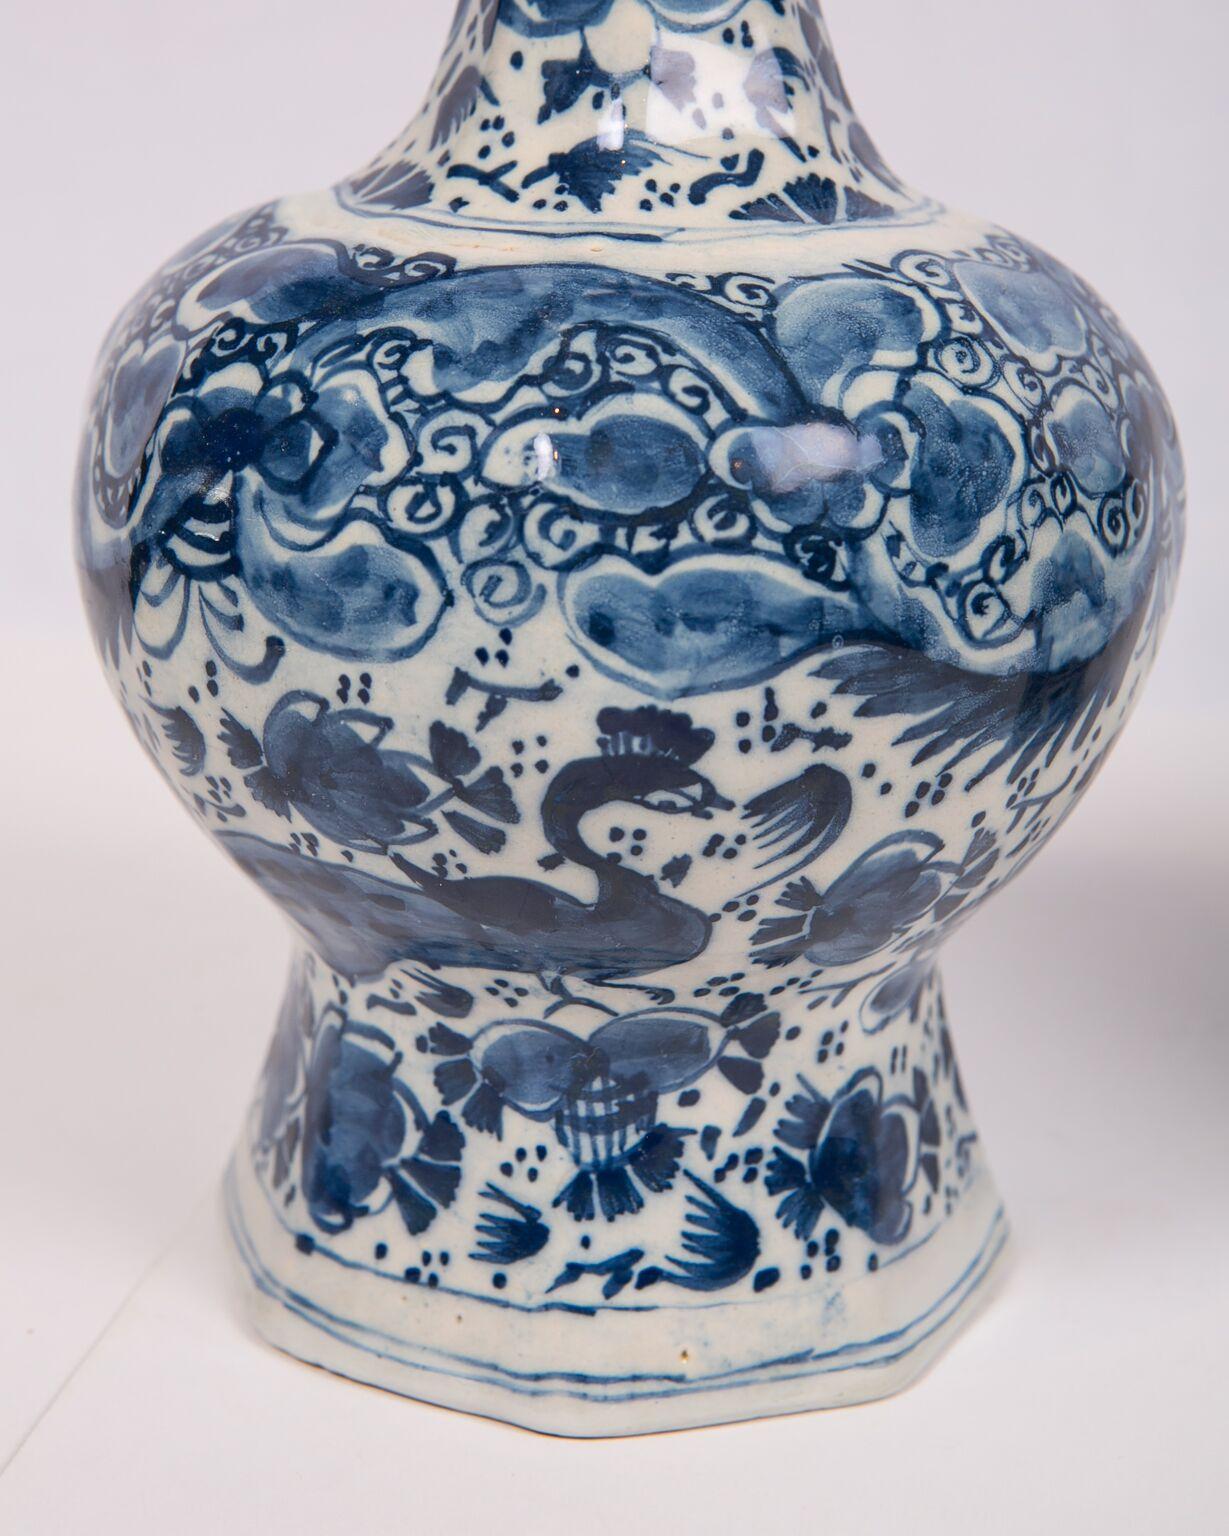 Dutch Pair of Blue and White Delft Vases Showing Peacocks and Flowers, 18th Century